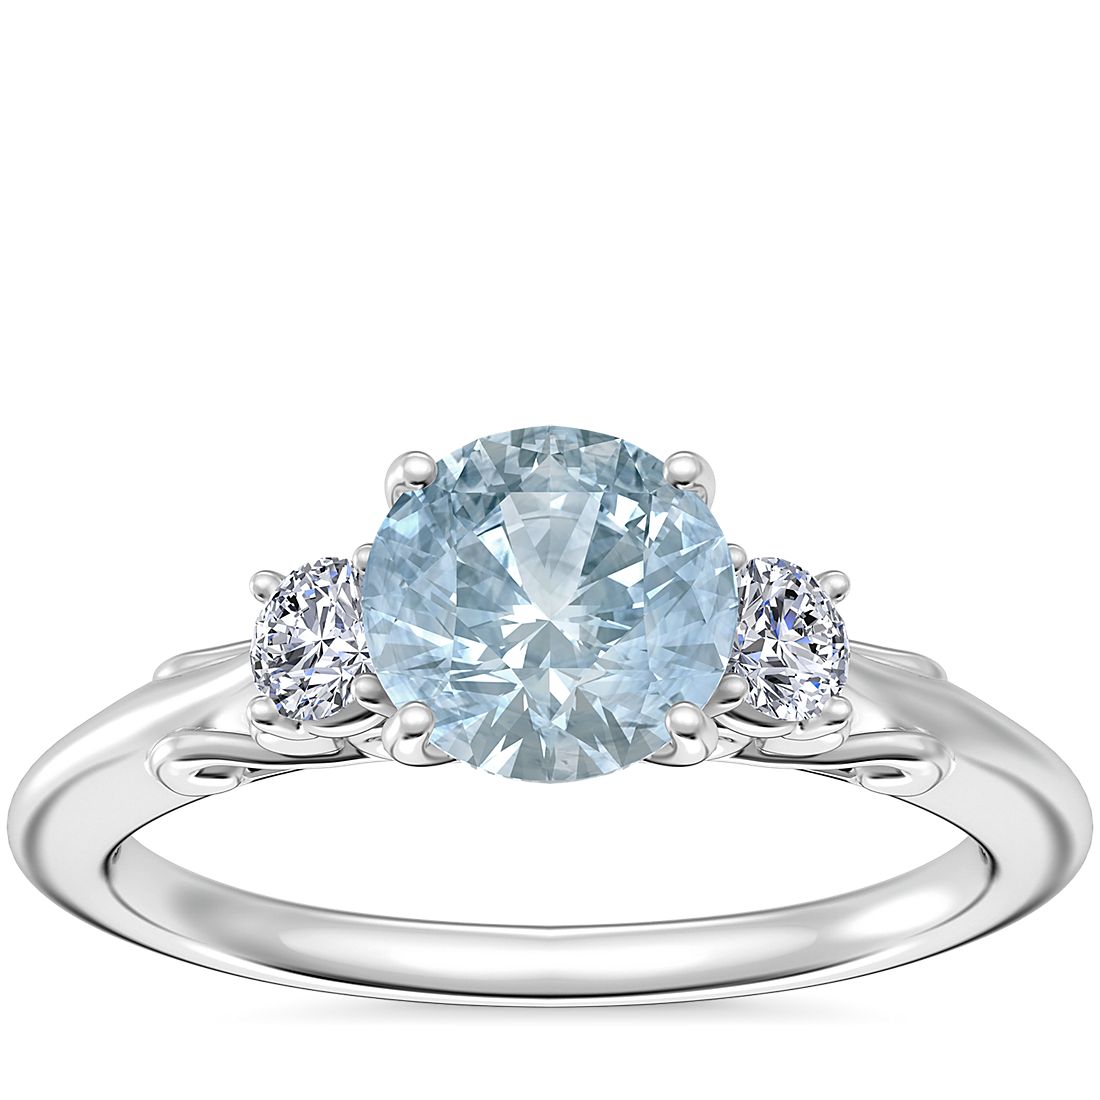 Vintage Three Stone Engagement Ring with Round Aquamarine in 14k White Gold (6.5mm)